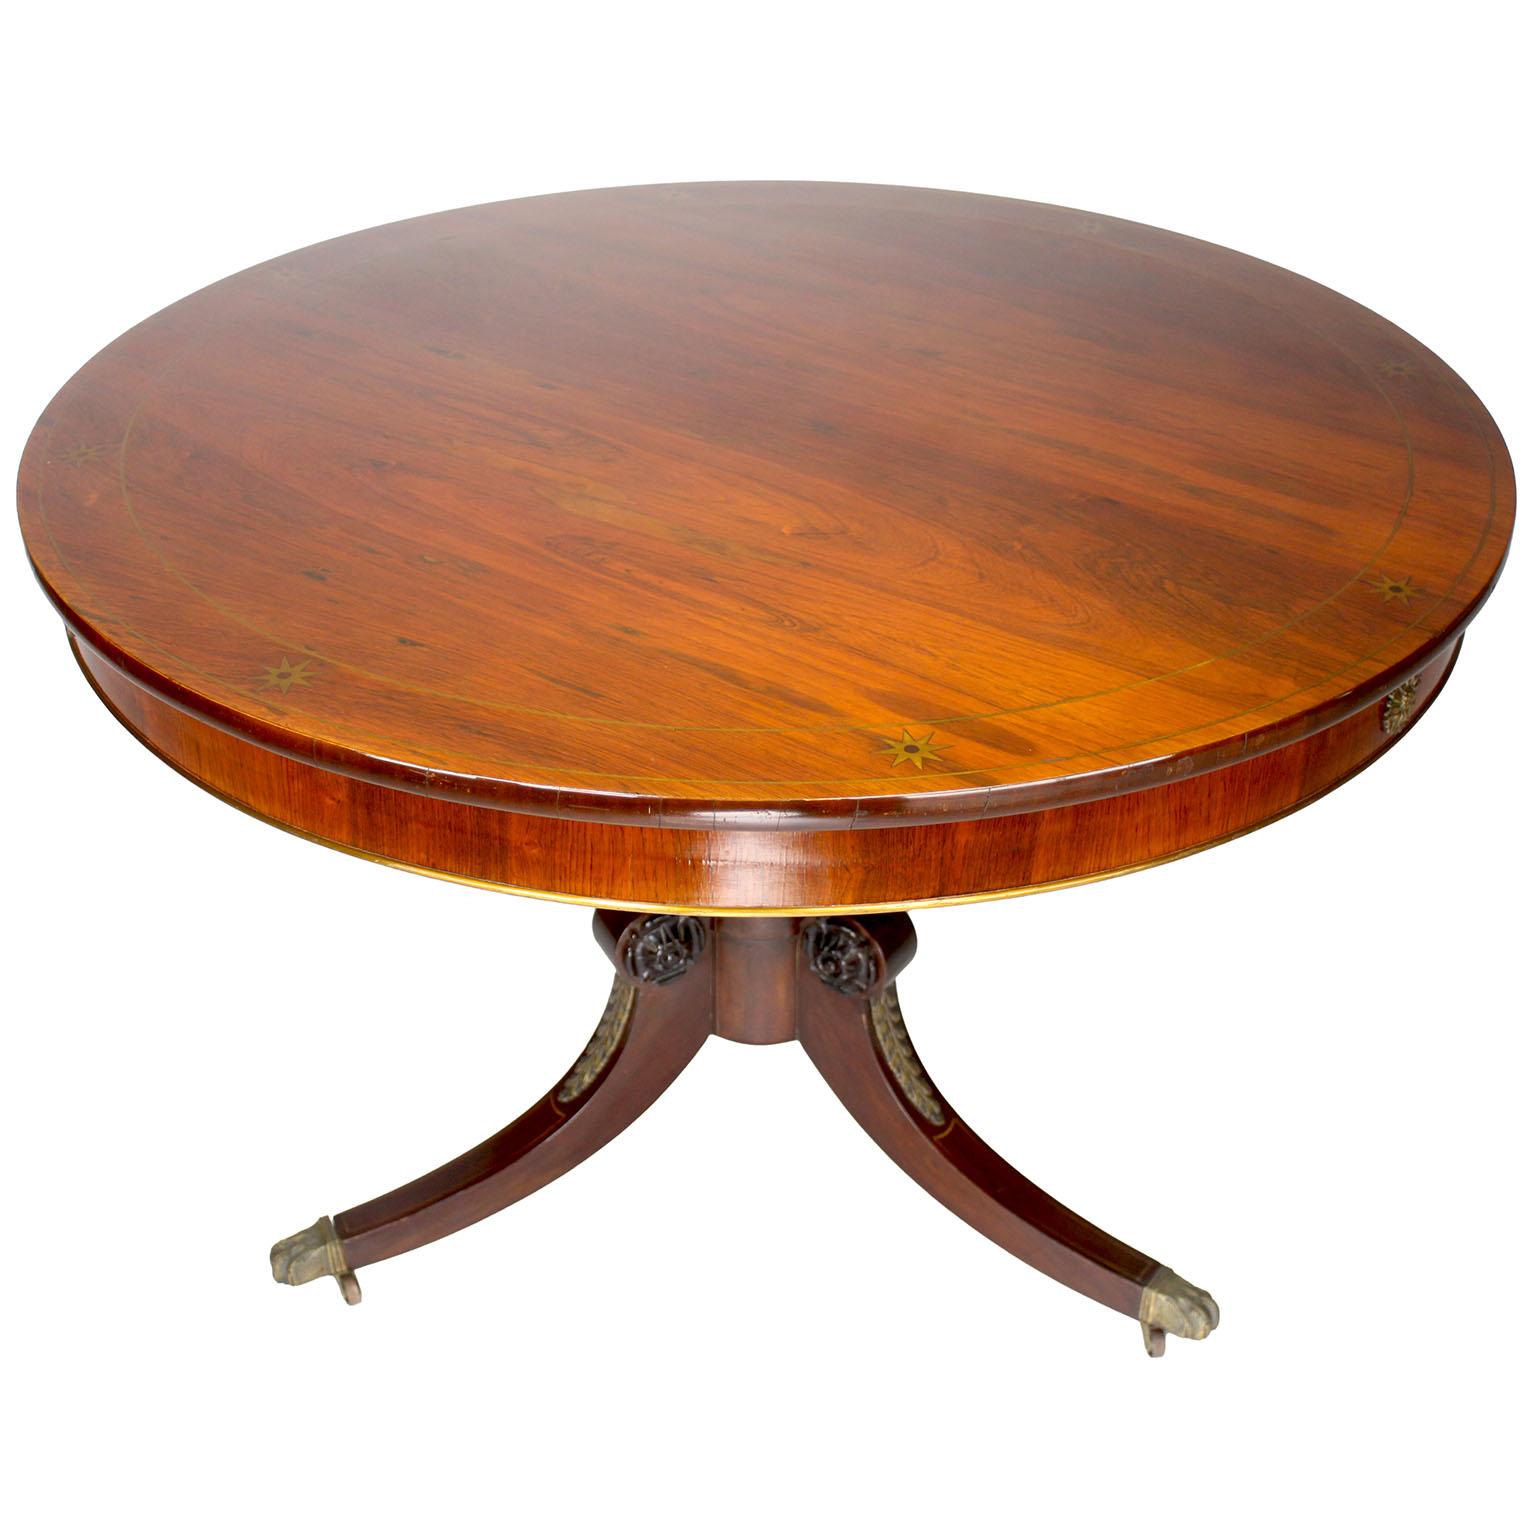 A Fine English 19th-20th Century Regency Style Brazilian Rosewood* with Bronze Mounted Circular Game Table, attributed to Maple & Co, London. The round three-legged carved mahogany pedestal game table, the top inlaid with a twin brass trim and stars